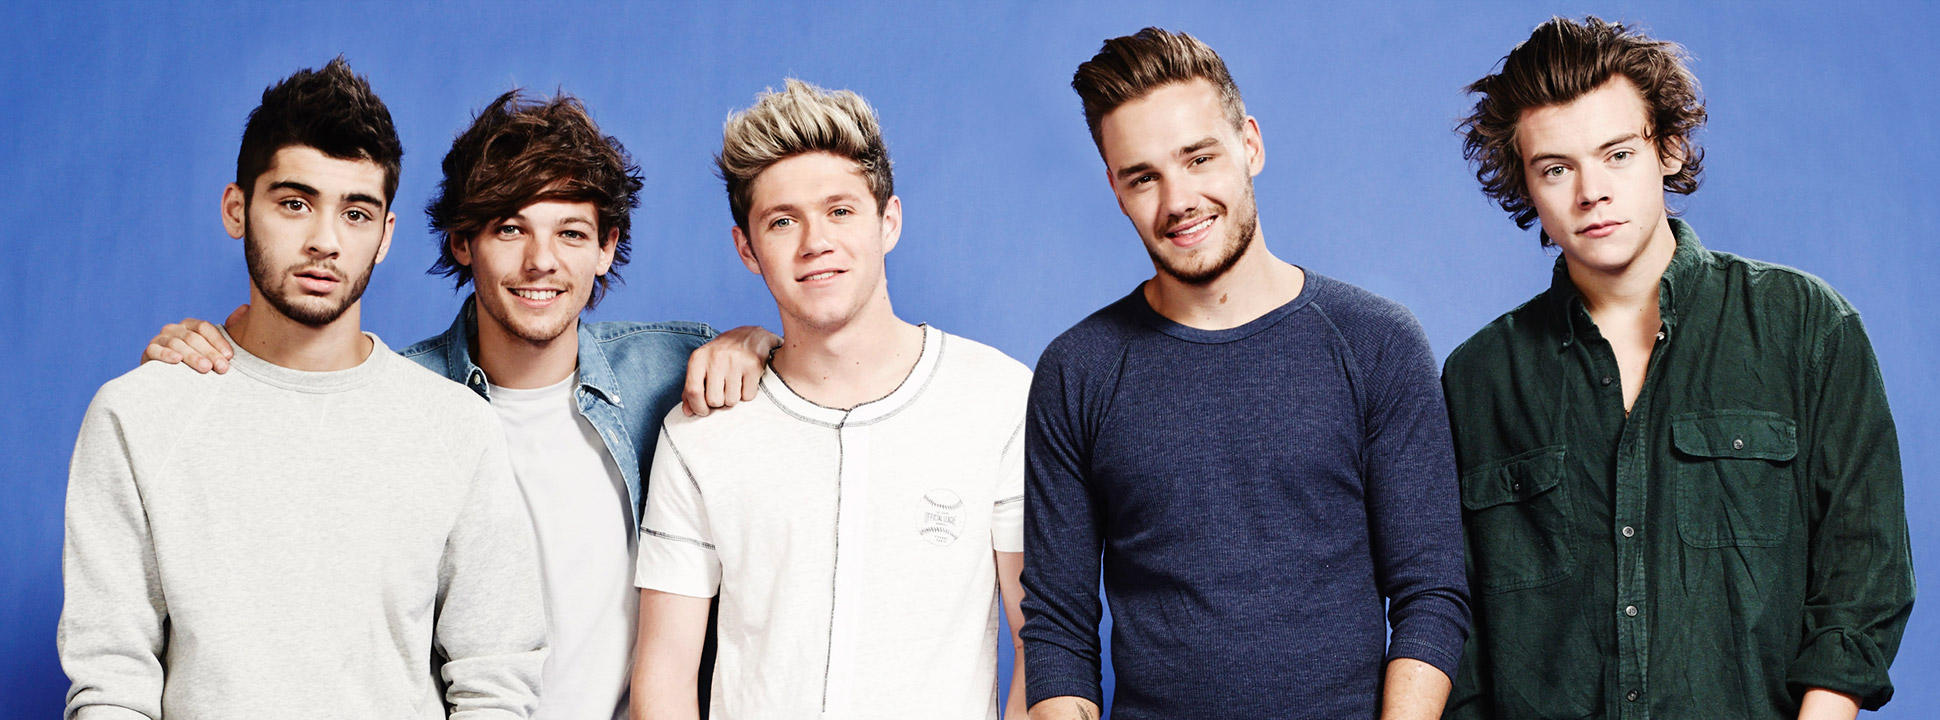 One Direction Wallpapers High Quality | Download Free